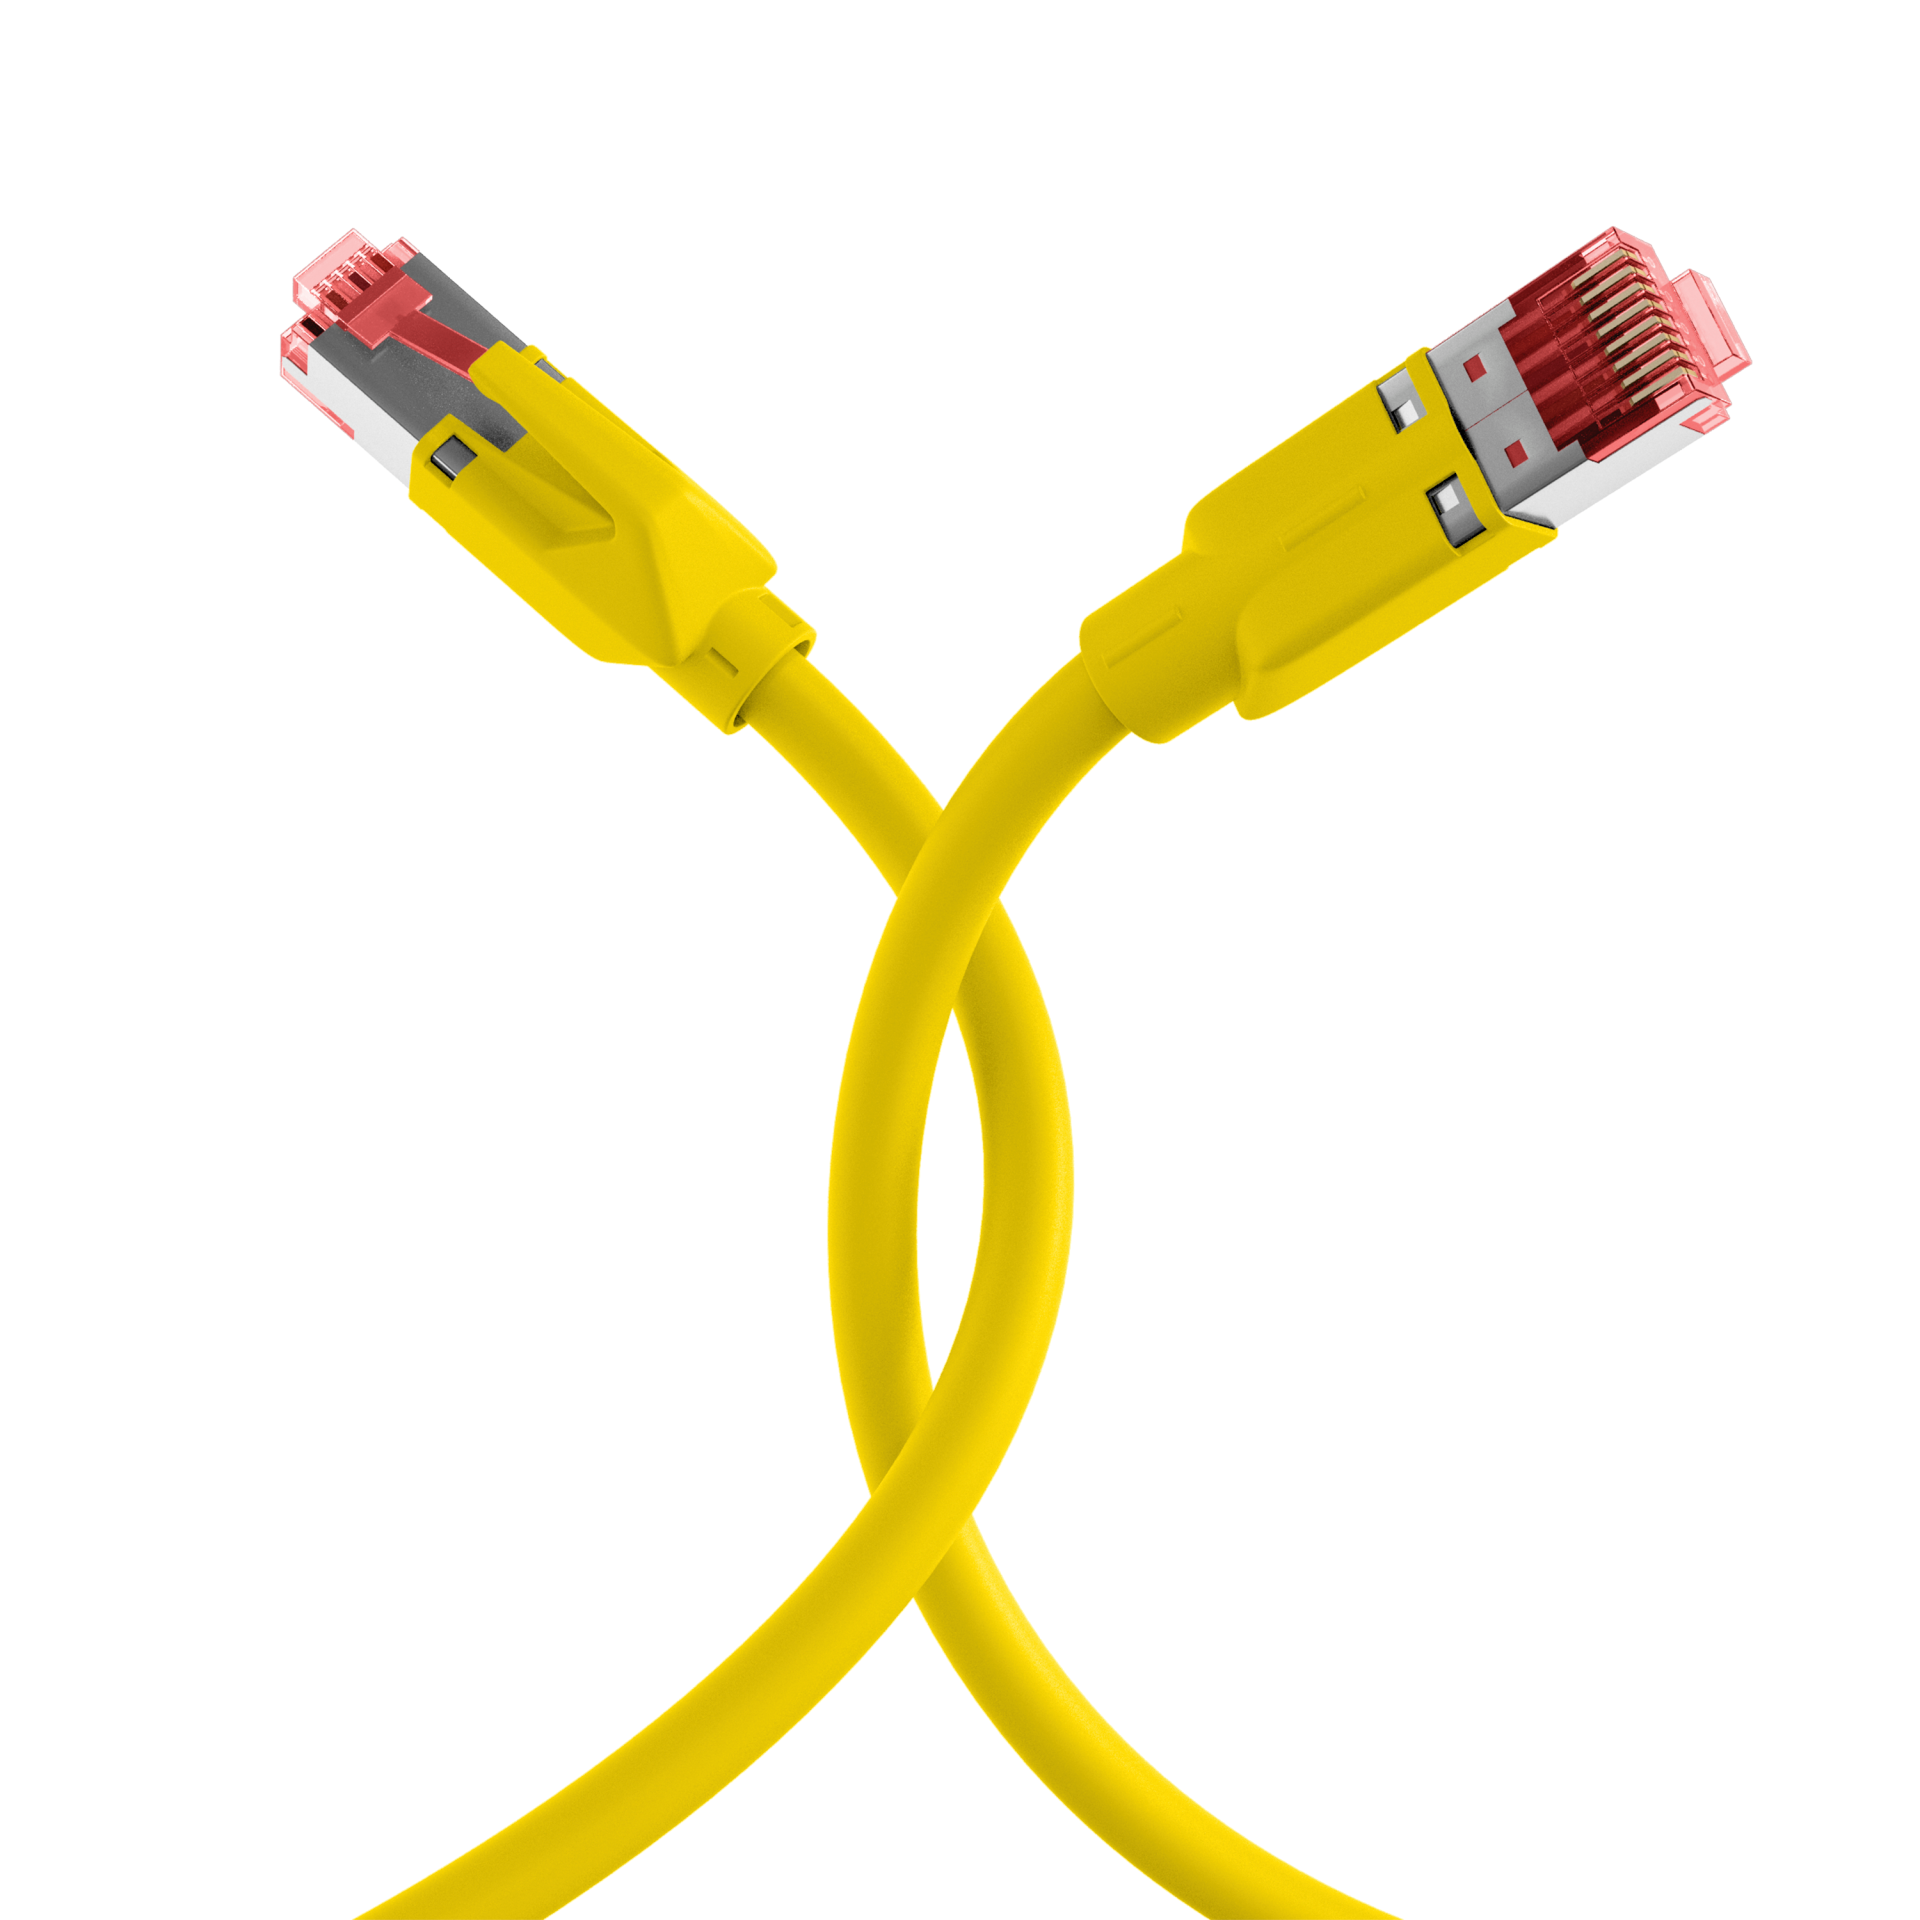 RJ45 Patch Cord Cat.5e SF/UTP PURTM21 for drag chains yellow 20m